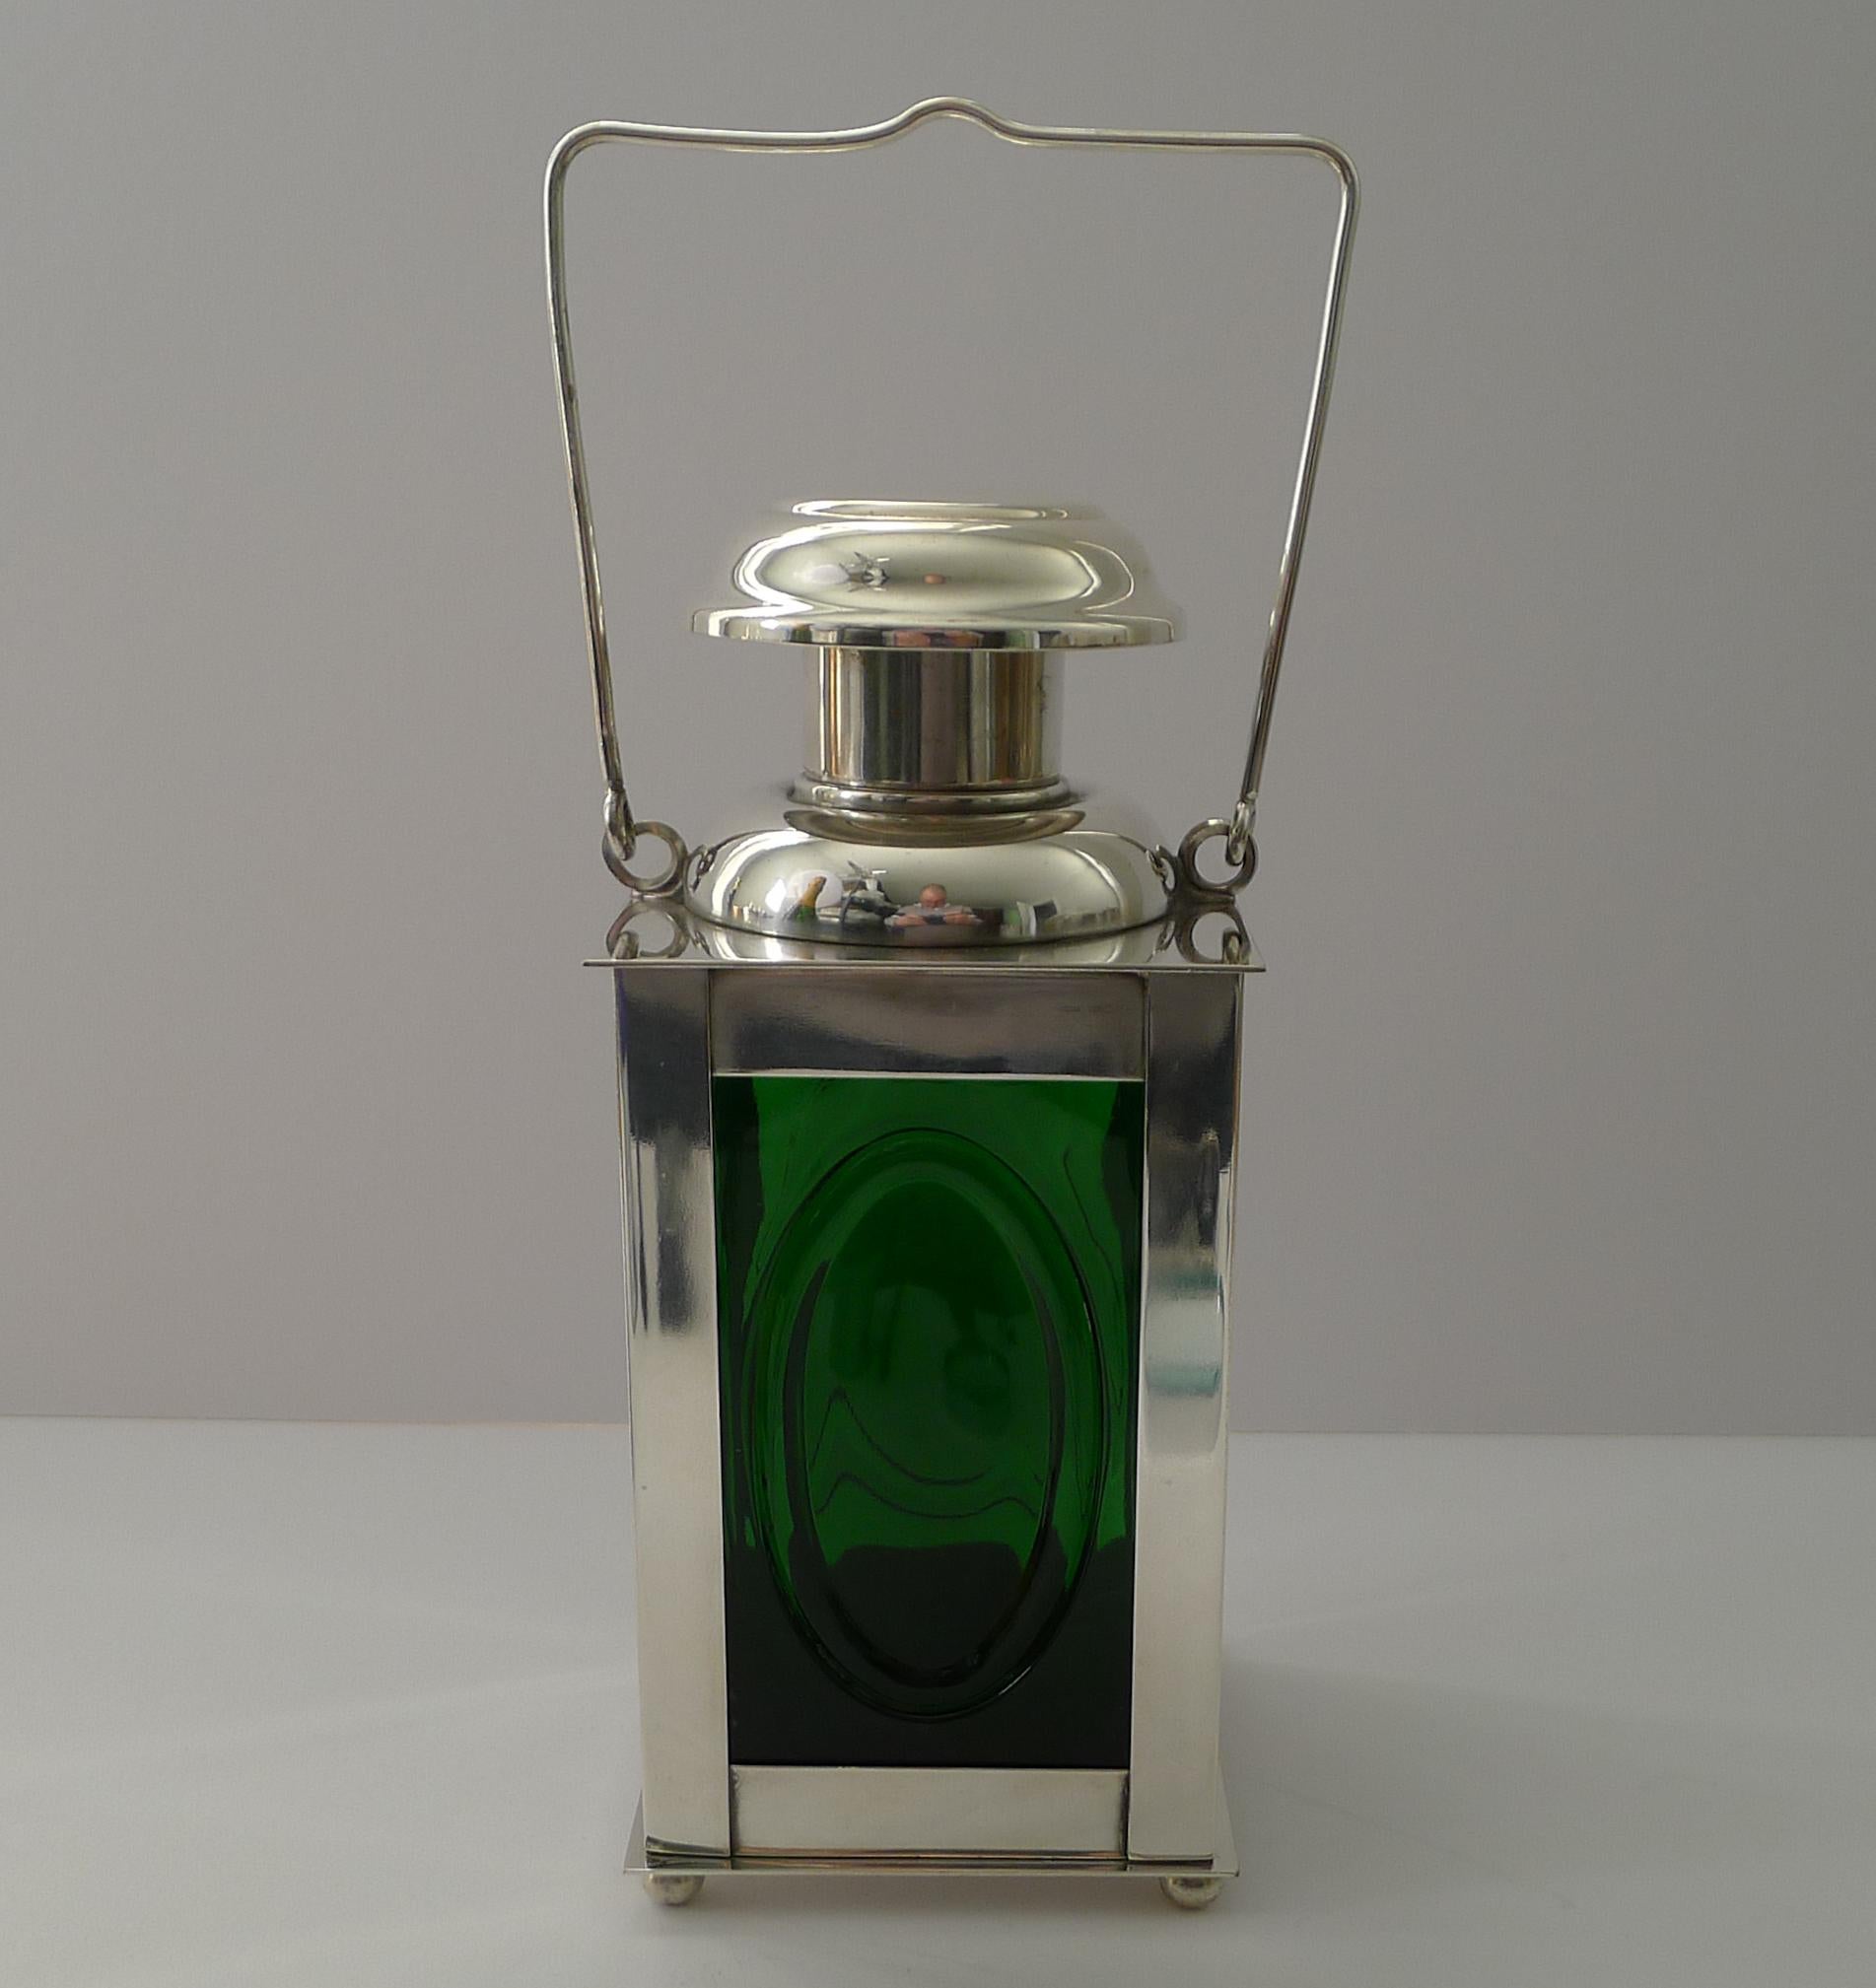 A wonderful and fun decanter or cocktail shaker made from silver plate with the original green bottle or decanter within in the form of a Marine or Railway Signal Lantern

The underside is where the full mark can be found, I believe for the